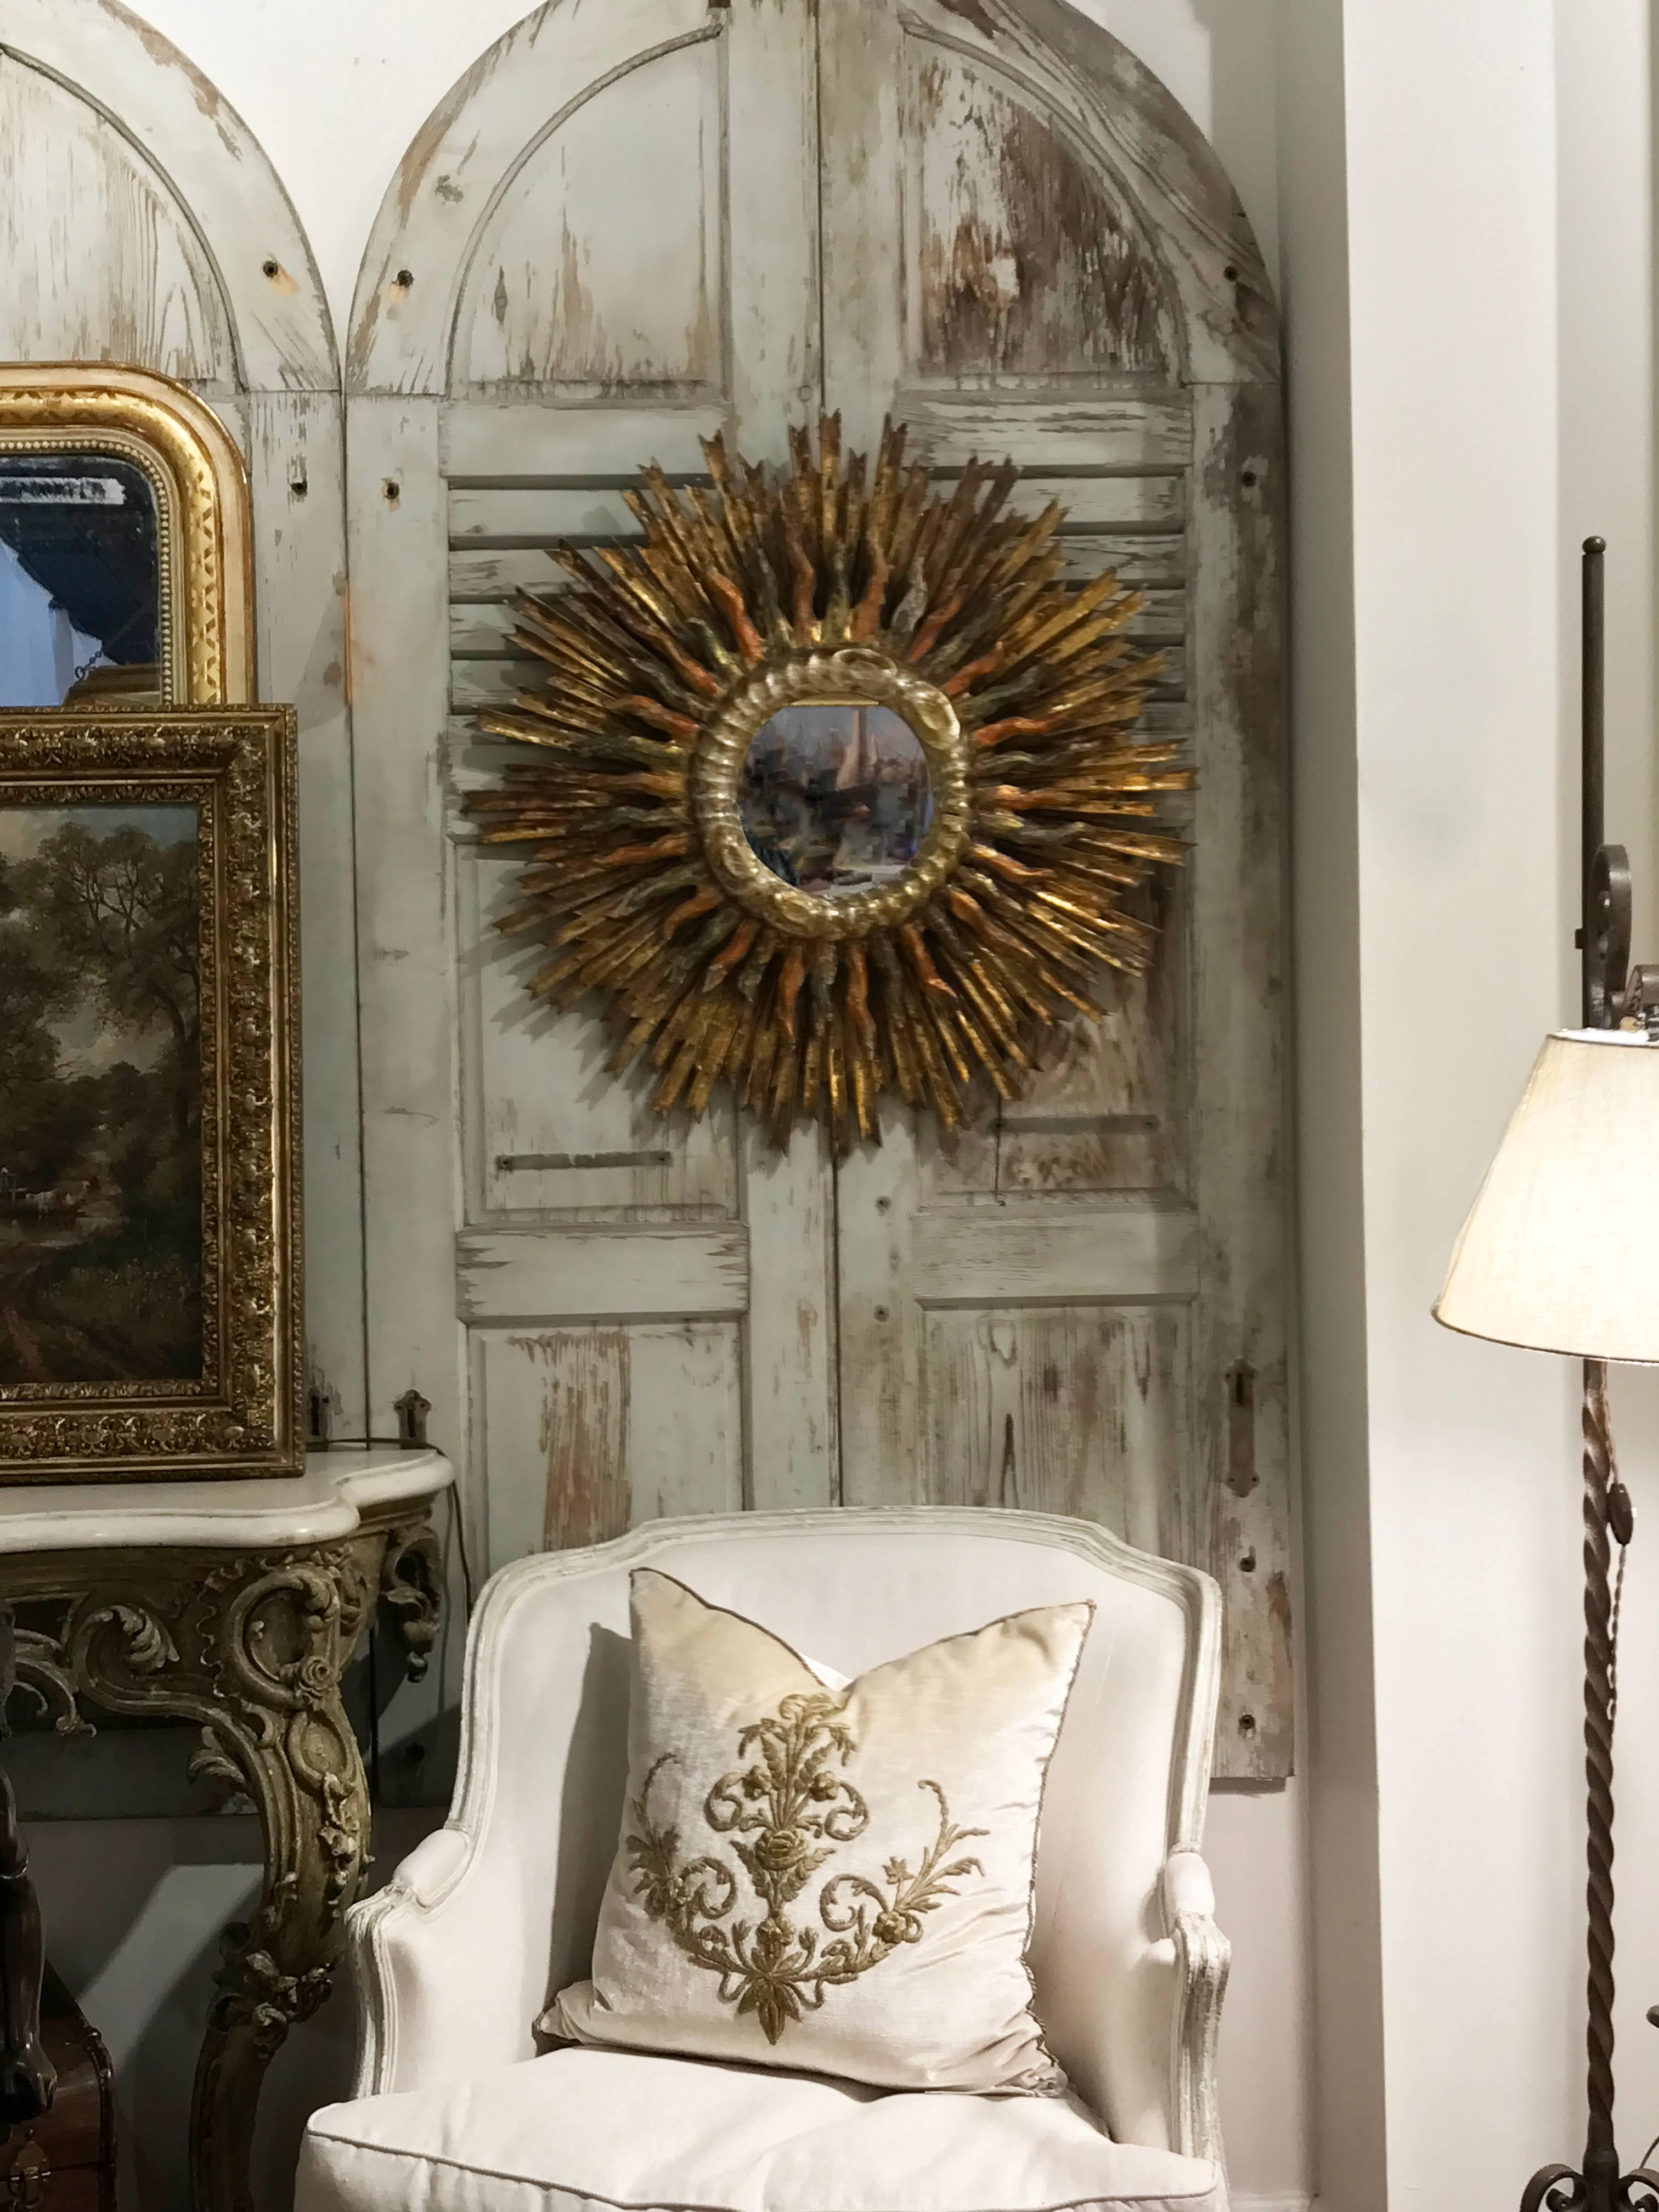 This exquisite Italian painted and gilded double sunburst mirror from the late 19th century features a clear mirror in the center, surrounded by a giltwood molding, reminiscent of wavy clouds. Radiating from the center, two layers of sun rays make